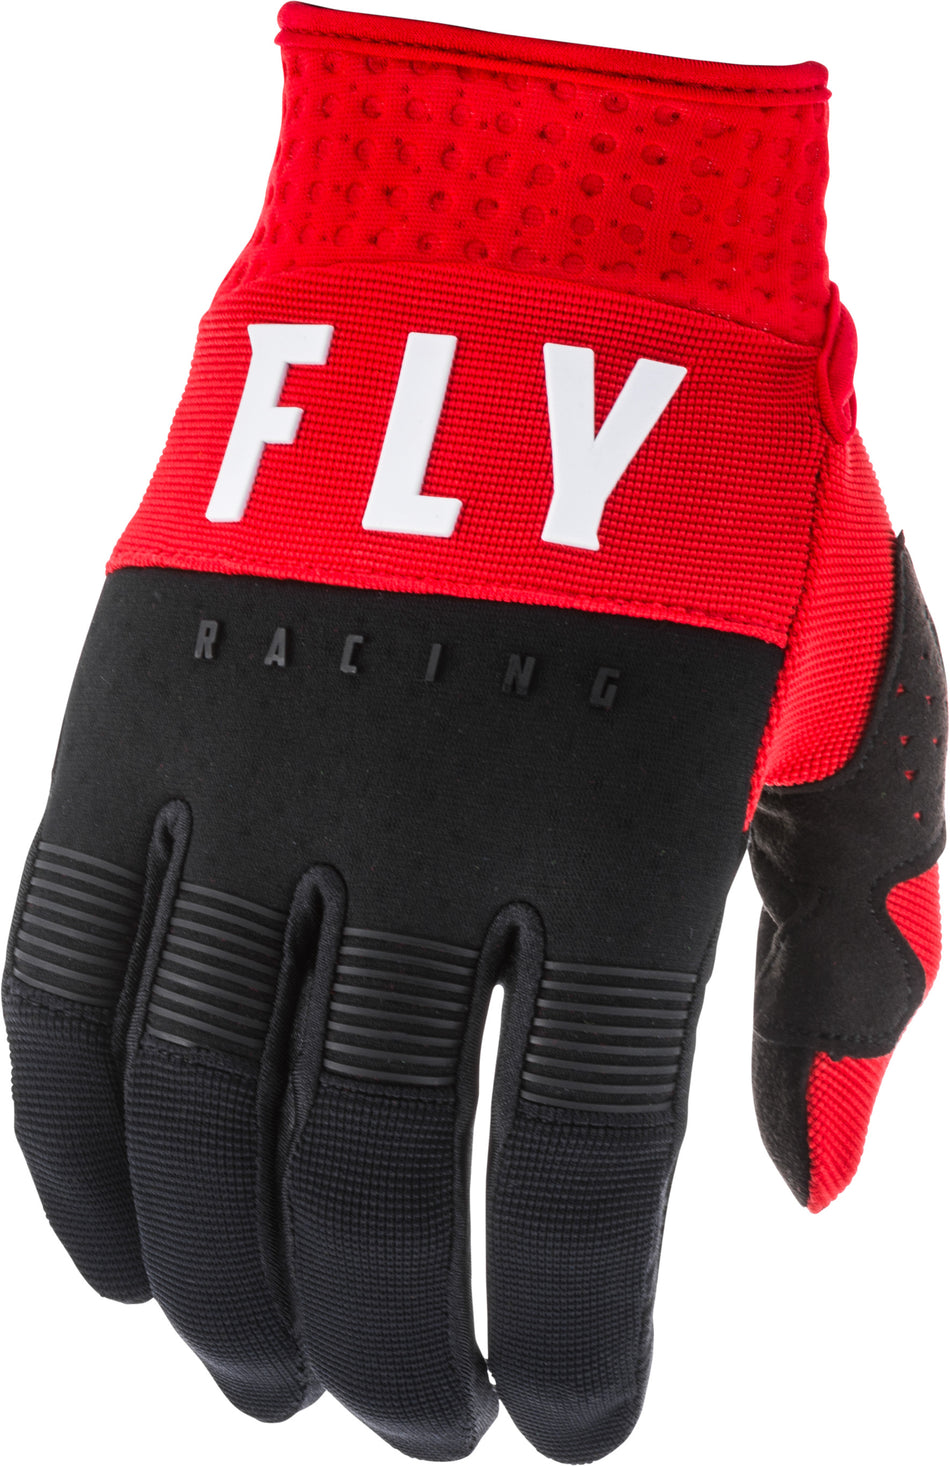 FLY RACING F-16 Gloves Red/Black/White Sz 05 373-91305